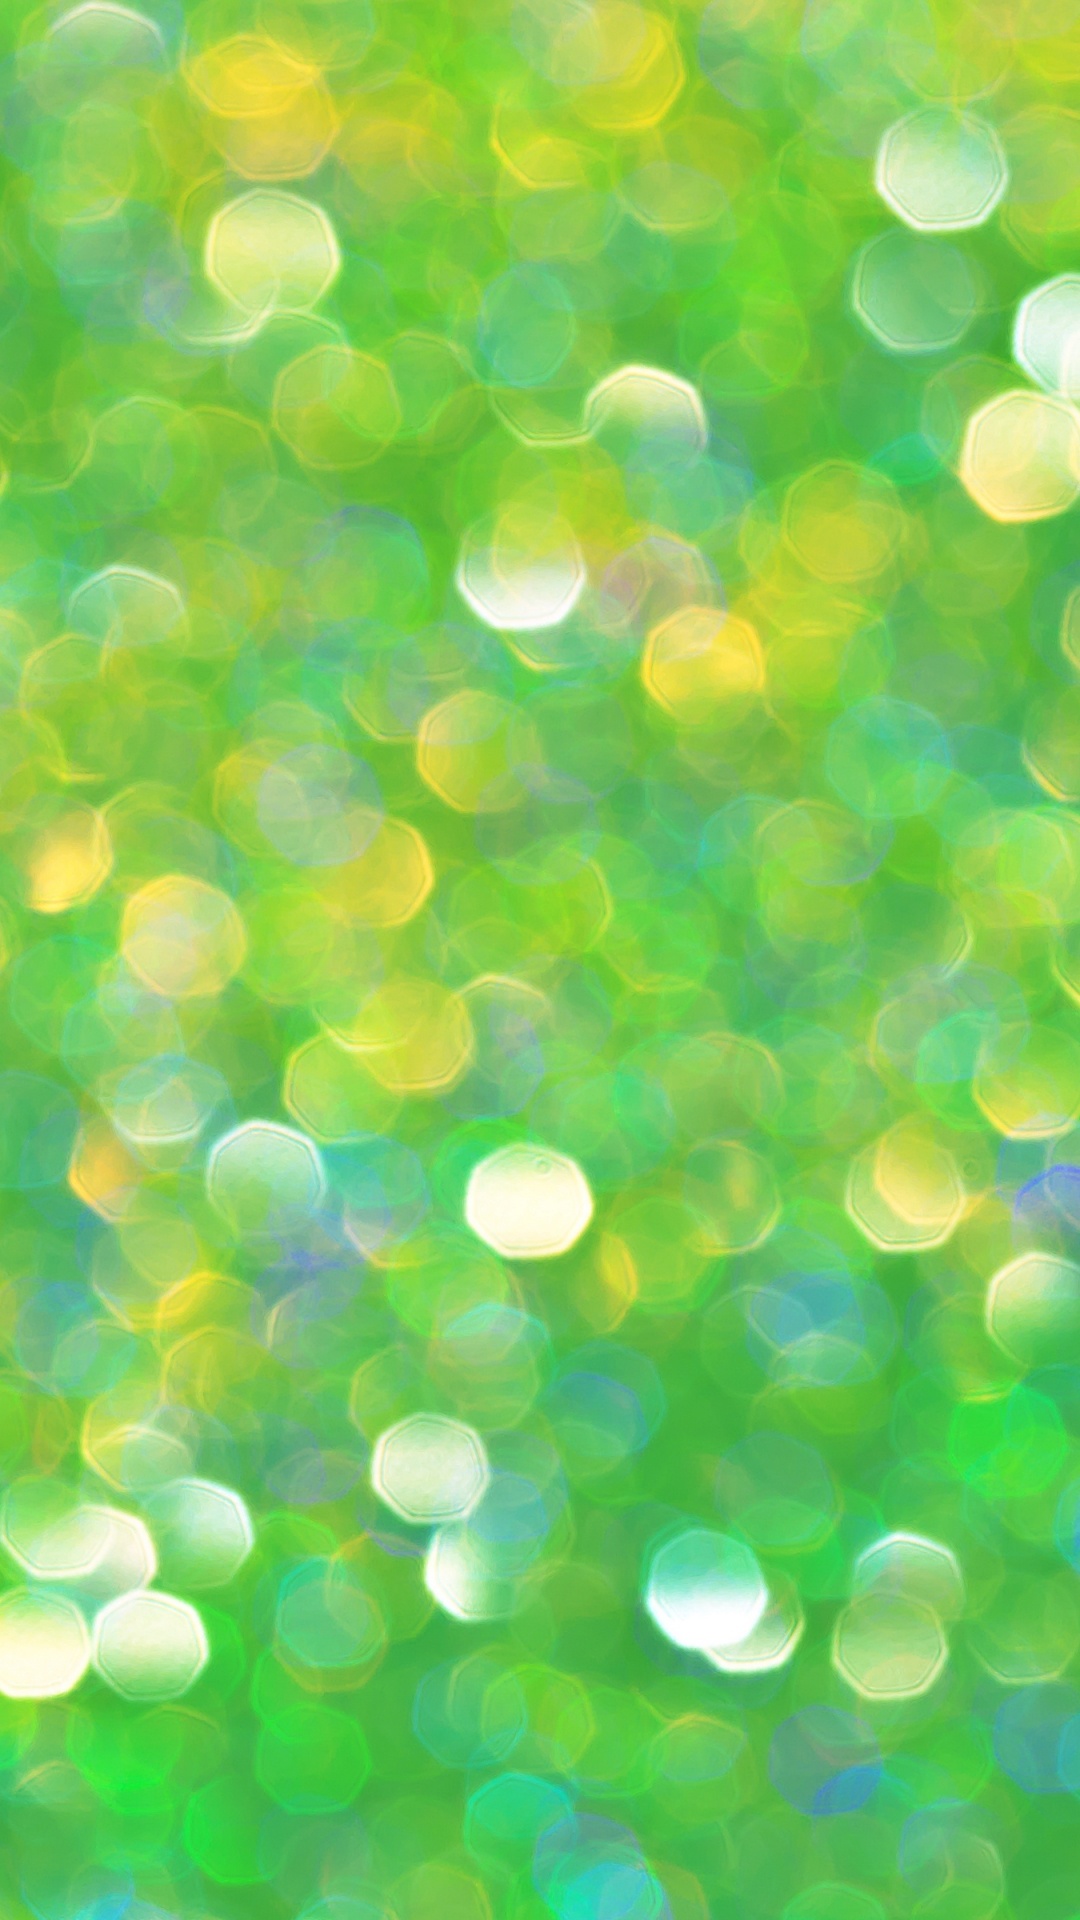 Green and White Bokeh Lights. Wallpaper in 1080x1920 Resolution